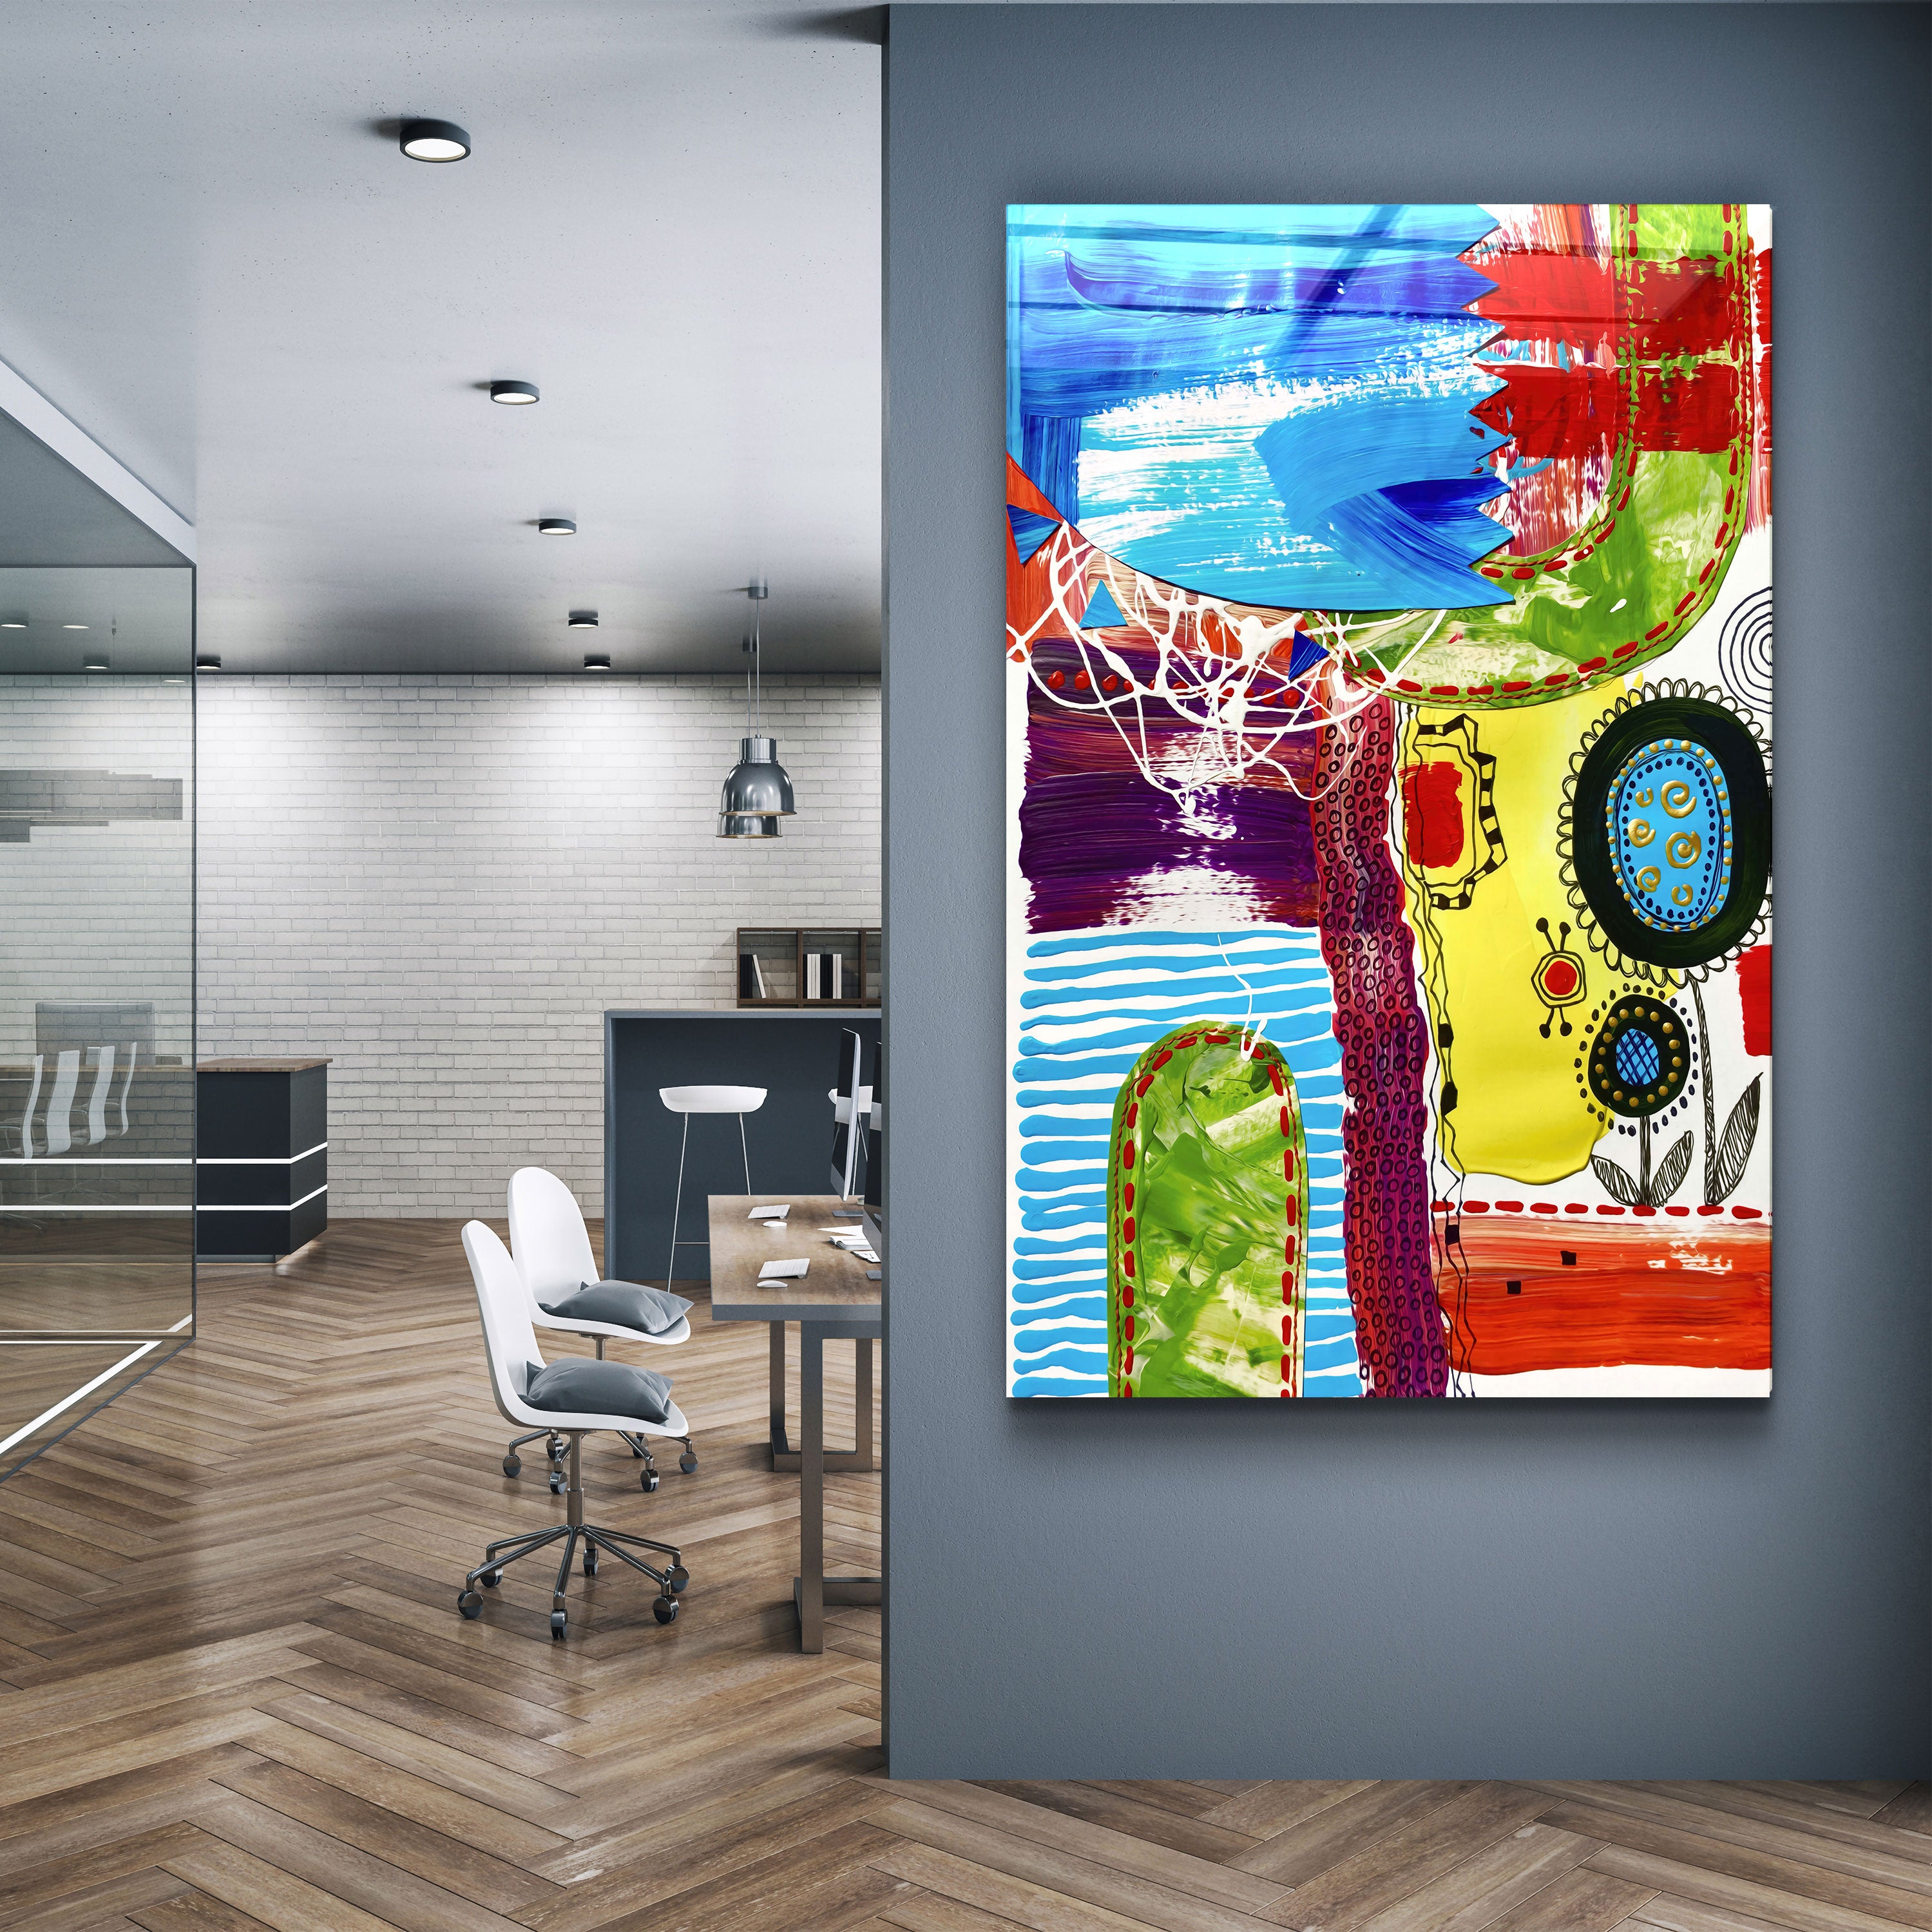 ・"Abstract Oil Painting"・Glass Wall Art